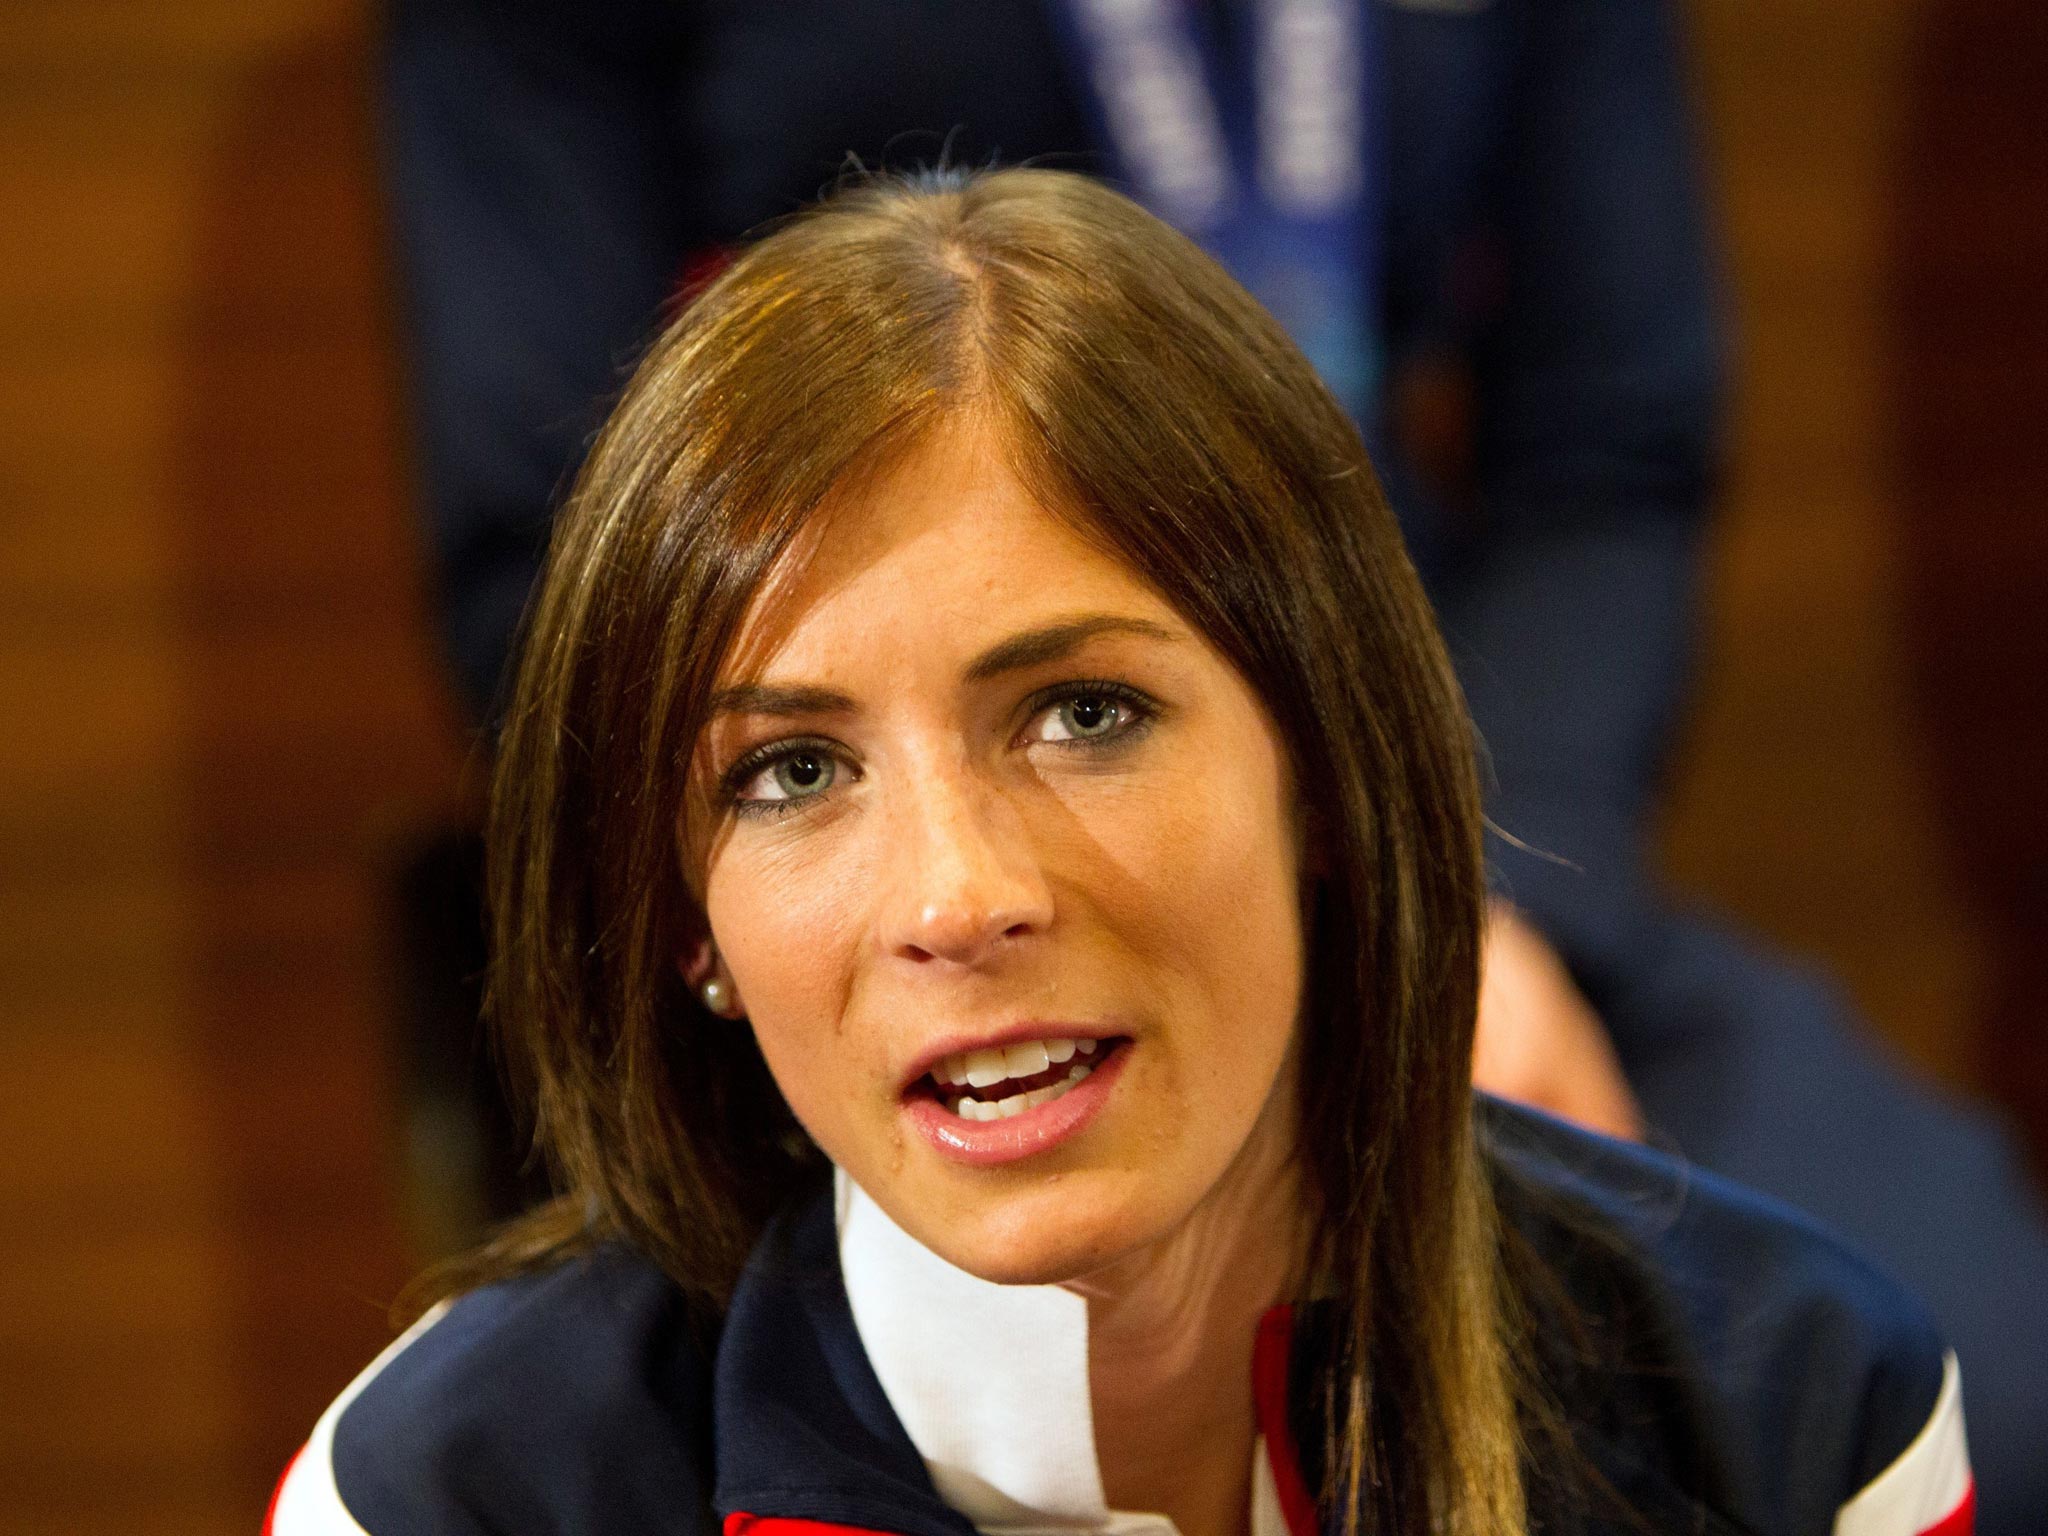 Eve Muirhead during a Press conference at Heathrow Airport